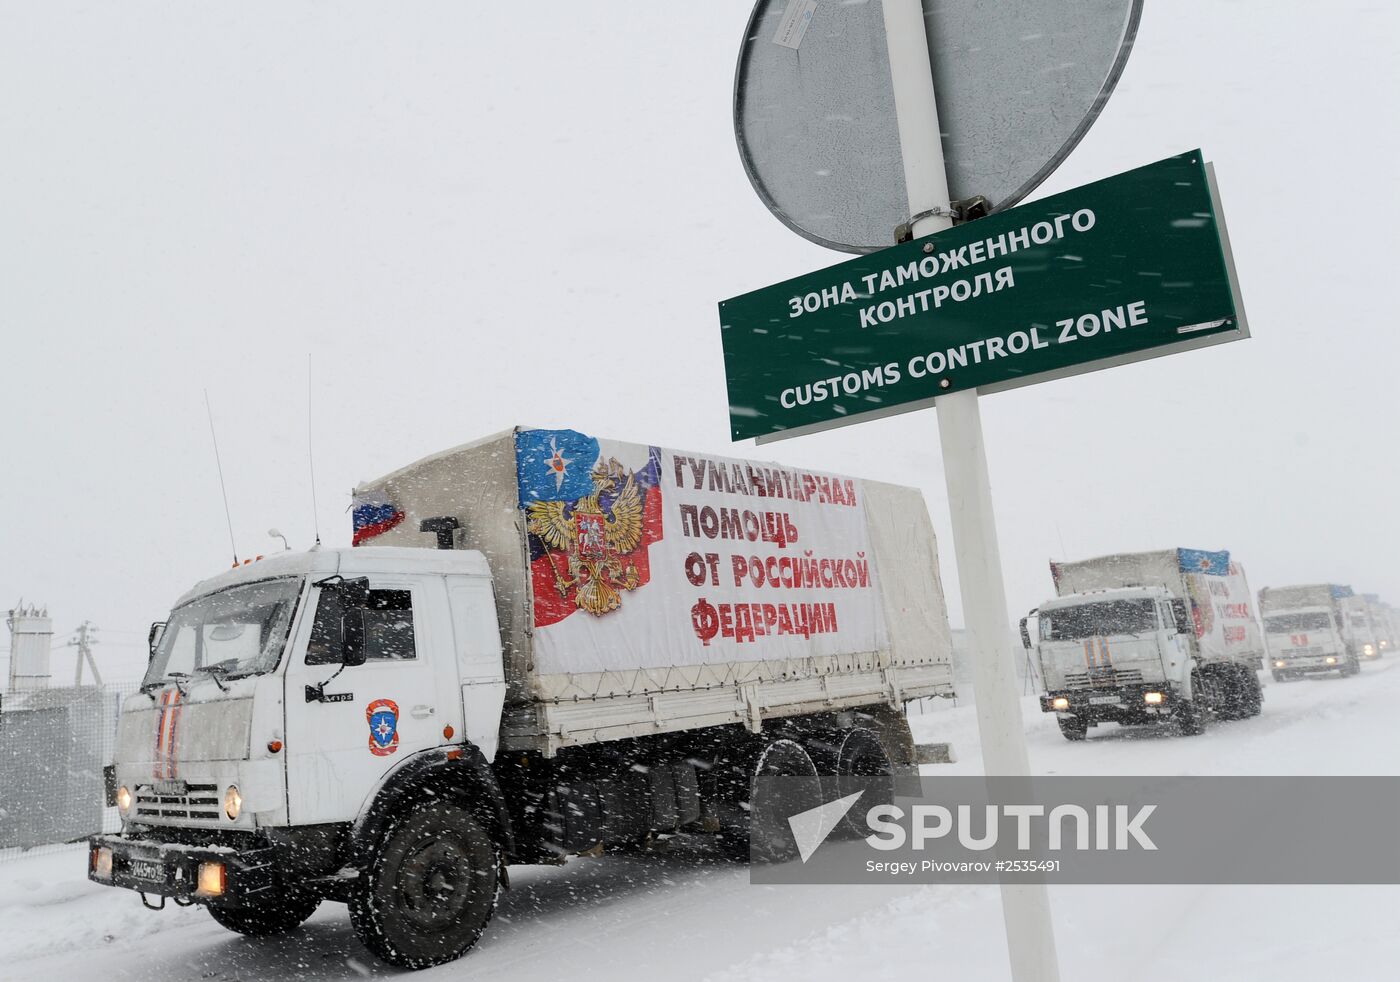 Russia's eighth humanitarian convoy carries aid for Donbas